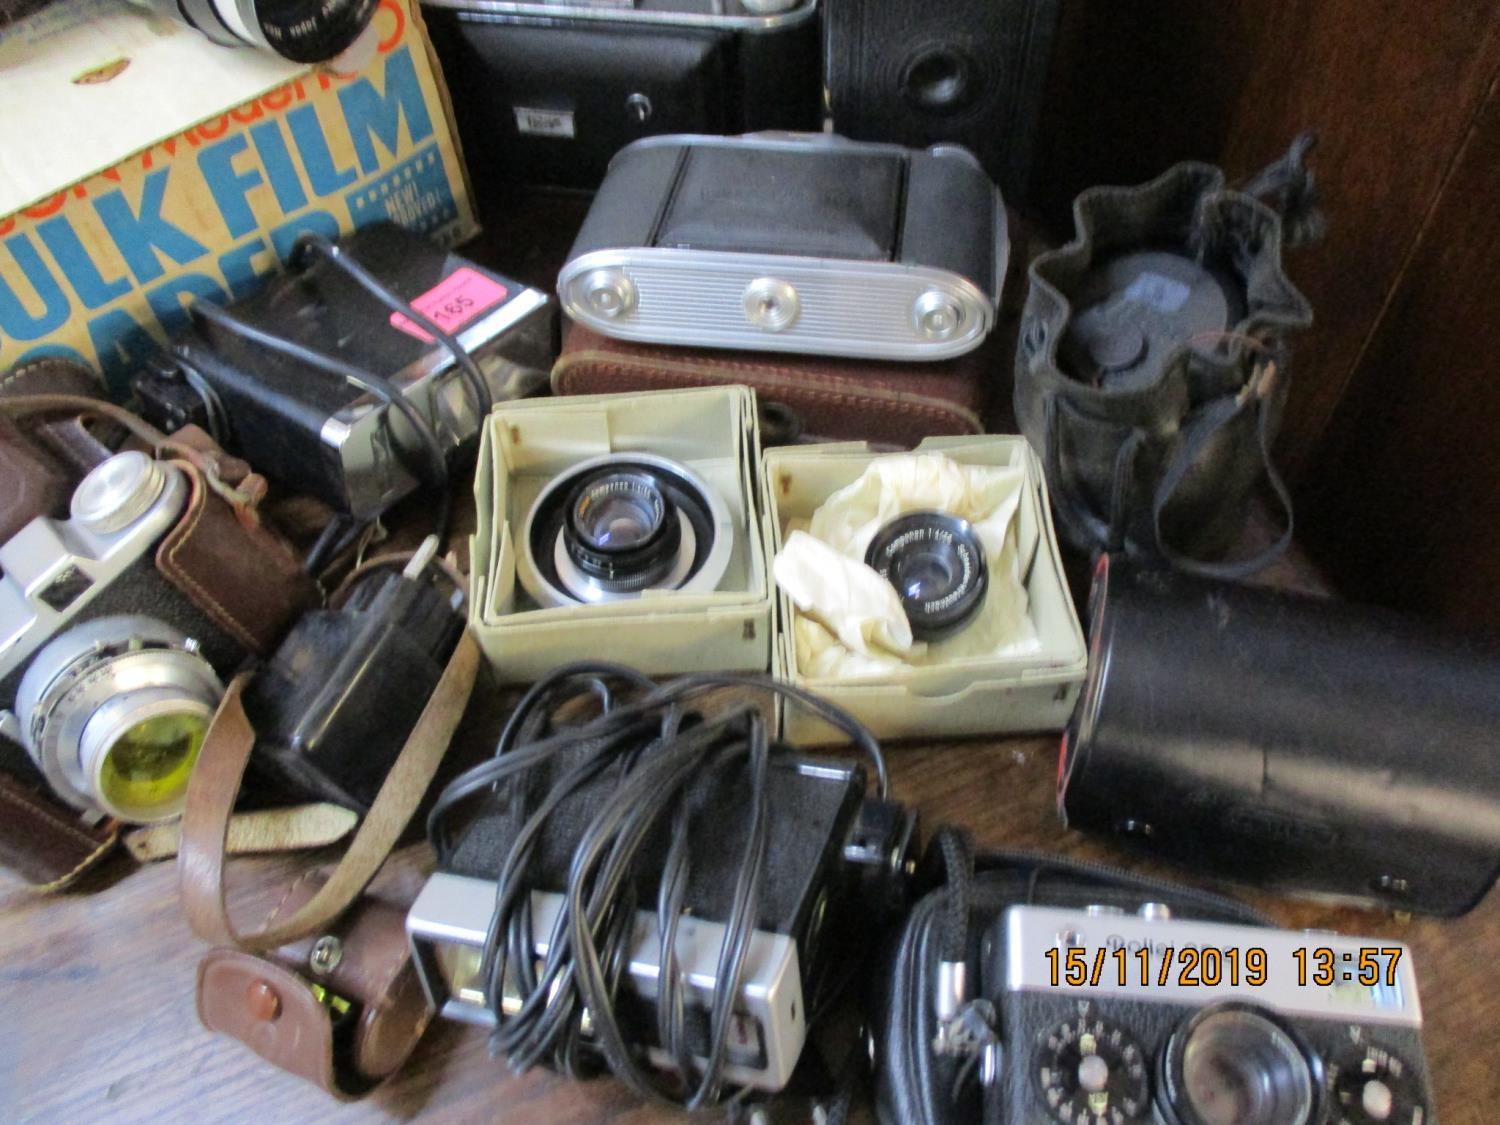 Vintage cameras to include a Nikkormat and an Agfa Isolette with camera accessories and mixed lenses - Image 2 of 2